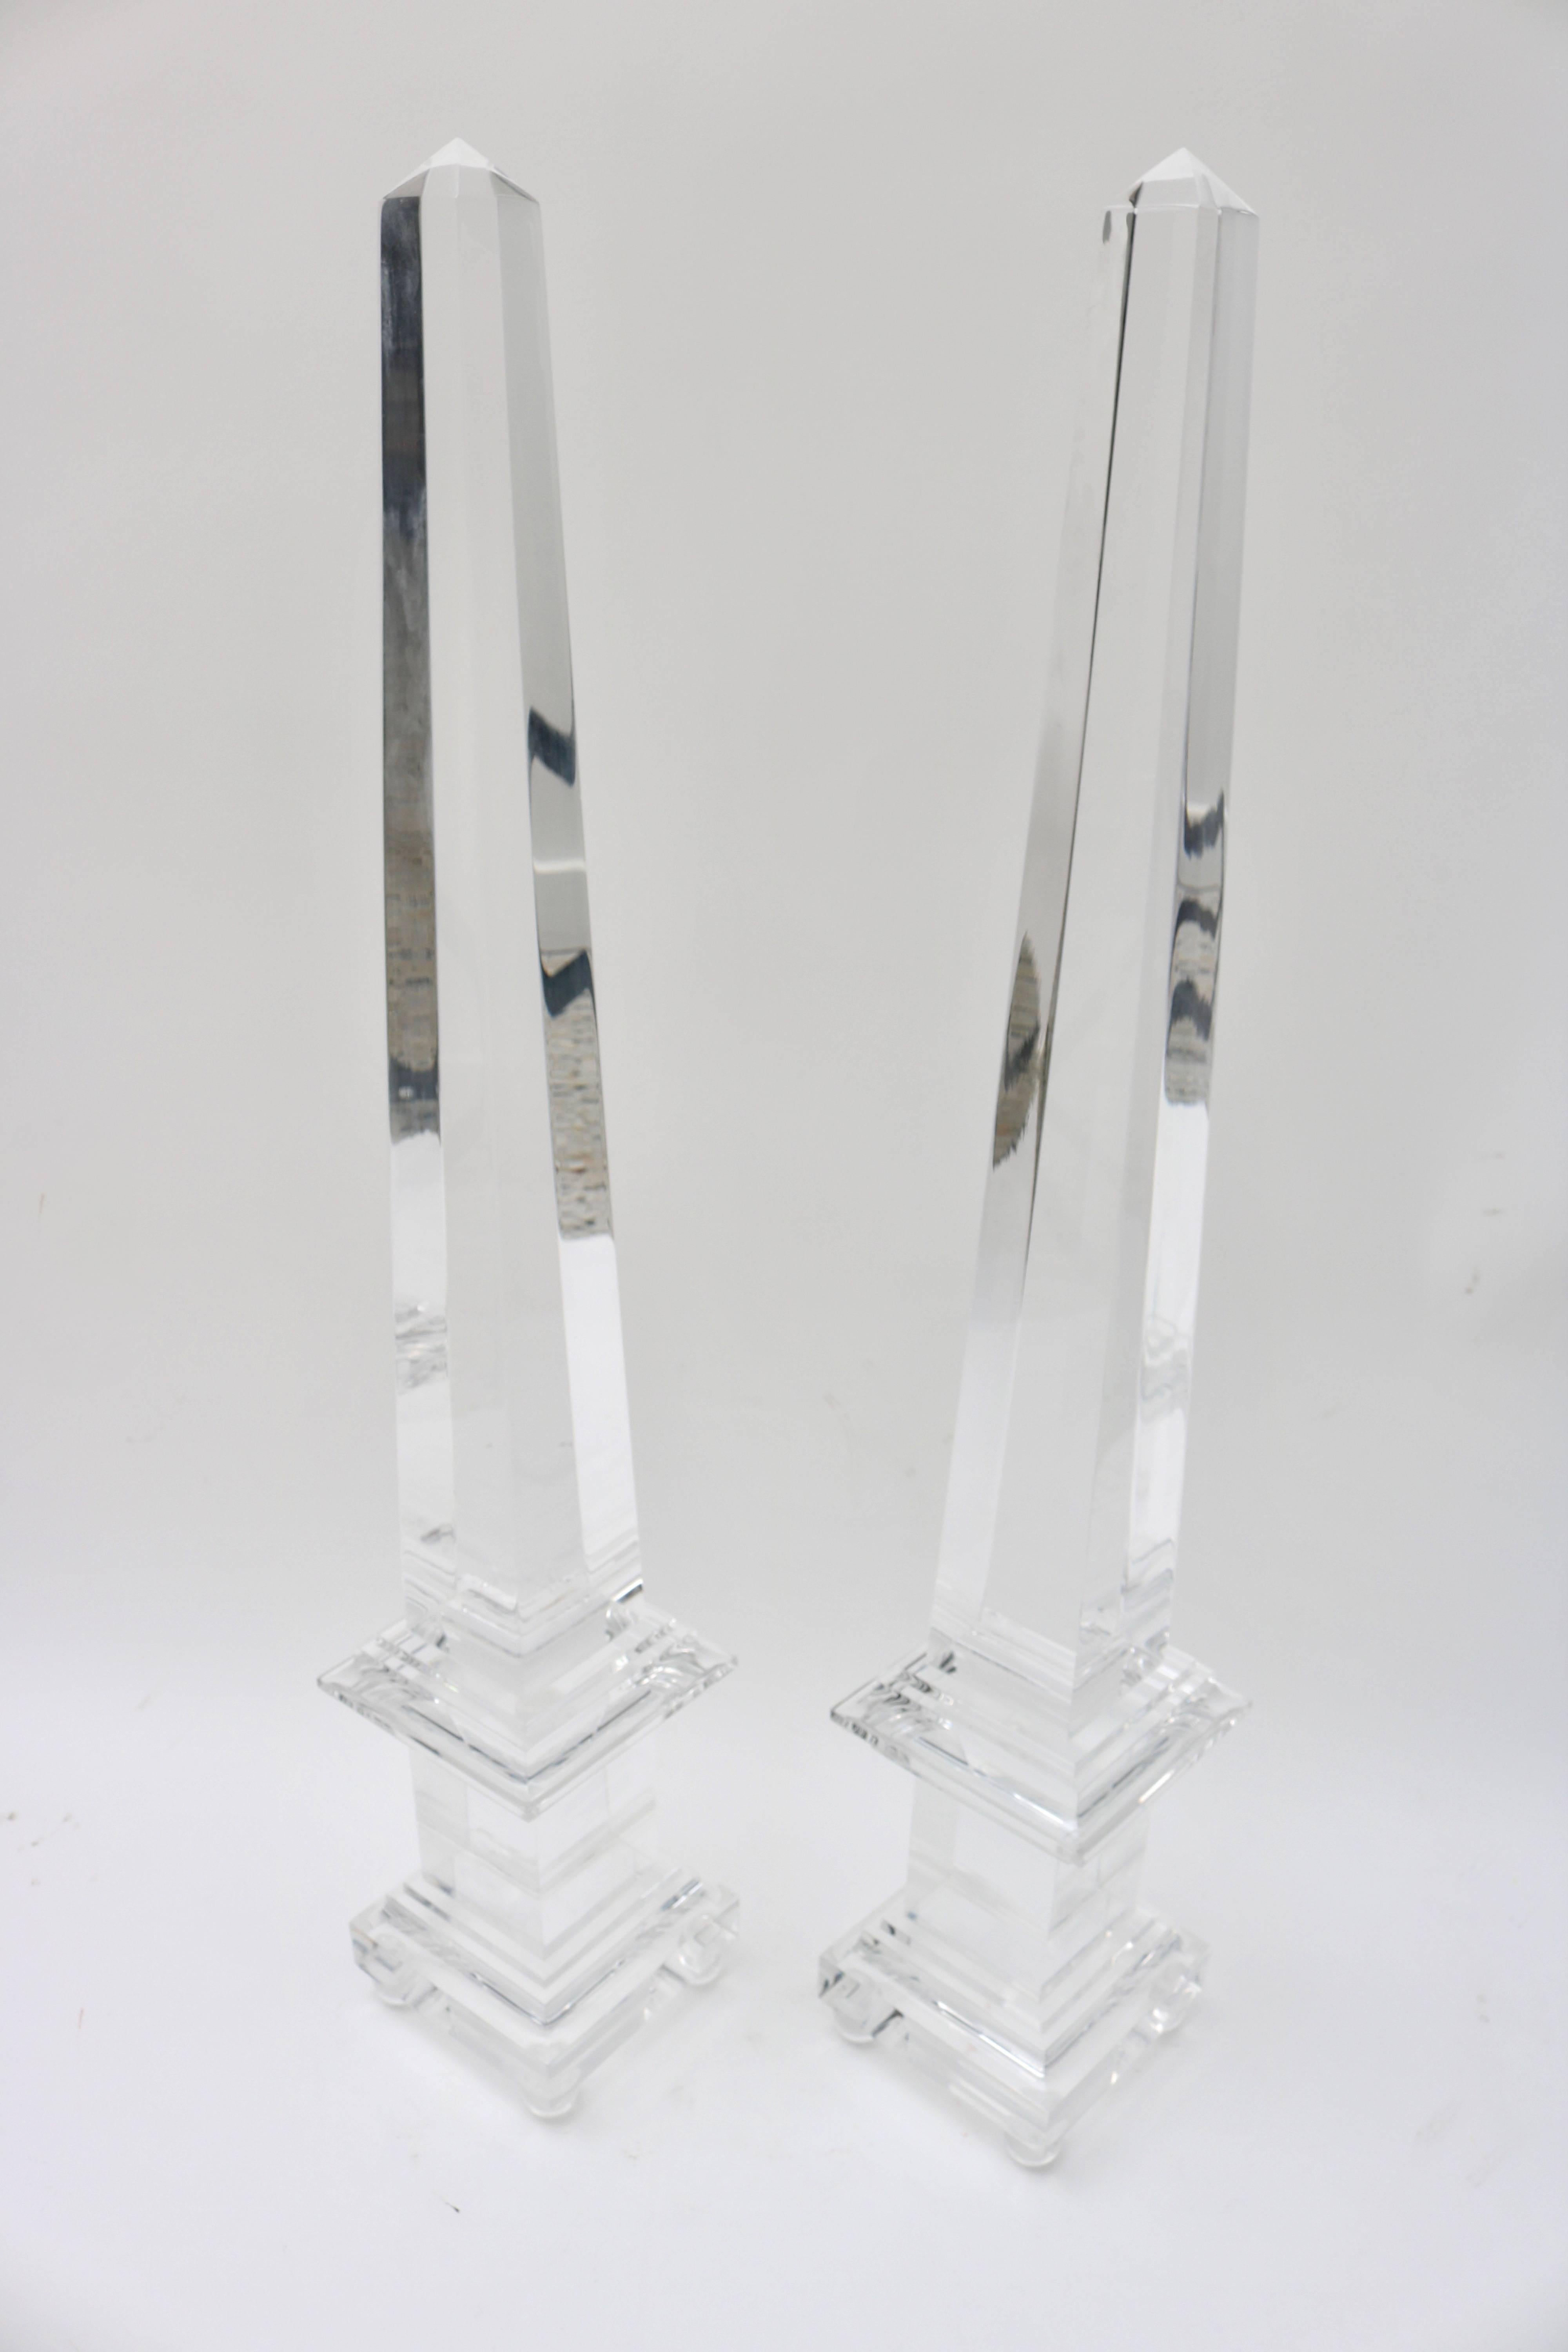 This large-scale pair of Lucite obelisk date from the 1970s and will make that perfect addition to your classic or modern interior. 

For best net trade price or additional questions regarding this item, please click the 